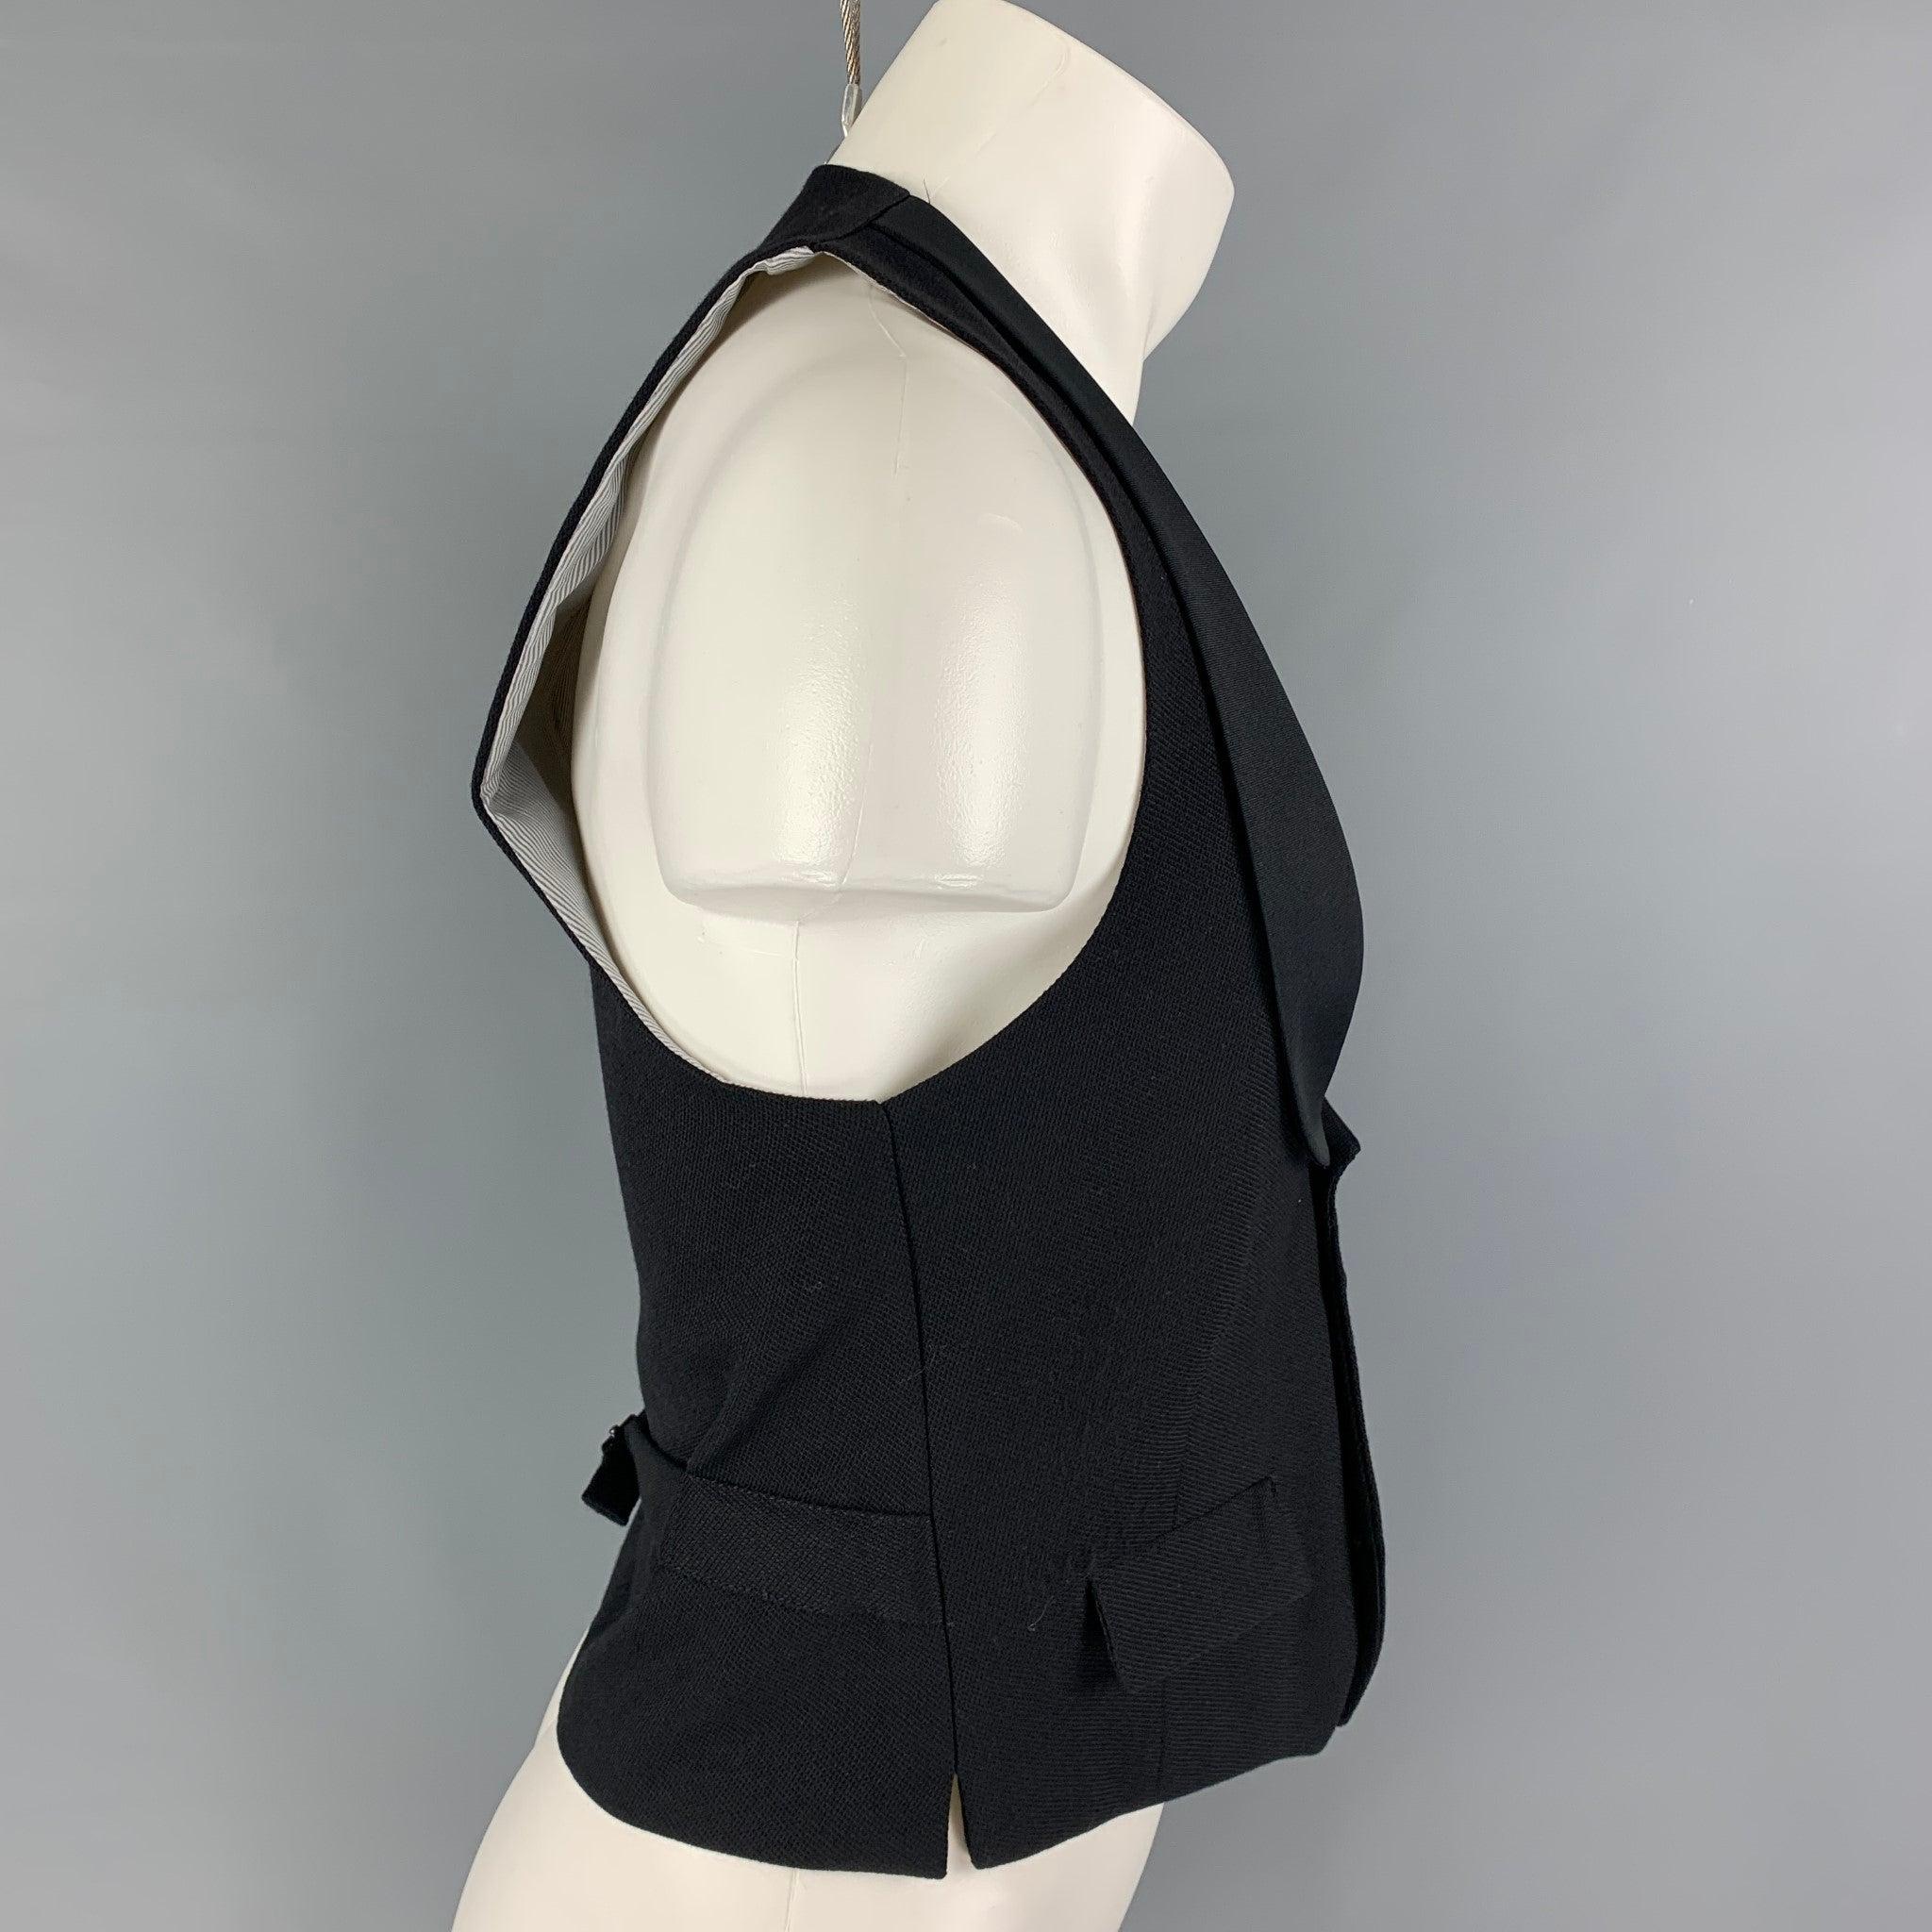 BAND OF OUTSIDERS vest comes in a black silk with a stripe lining featuring a shawl collar, flap pockets, adjustable back strap, and a buttoned closure. Made in USA.
Excellent
Pre-Owned Condition. 

Marked:   2 

Measurements: 
 
Shoulder: 11 inches